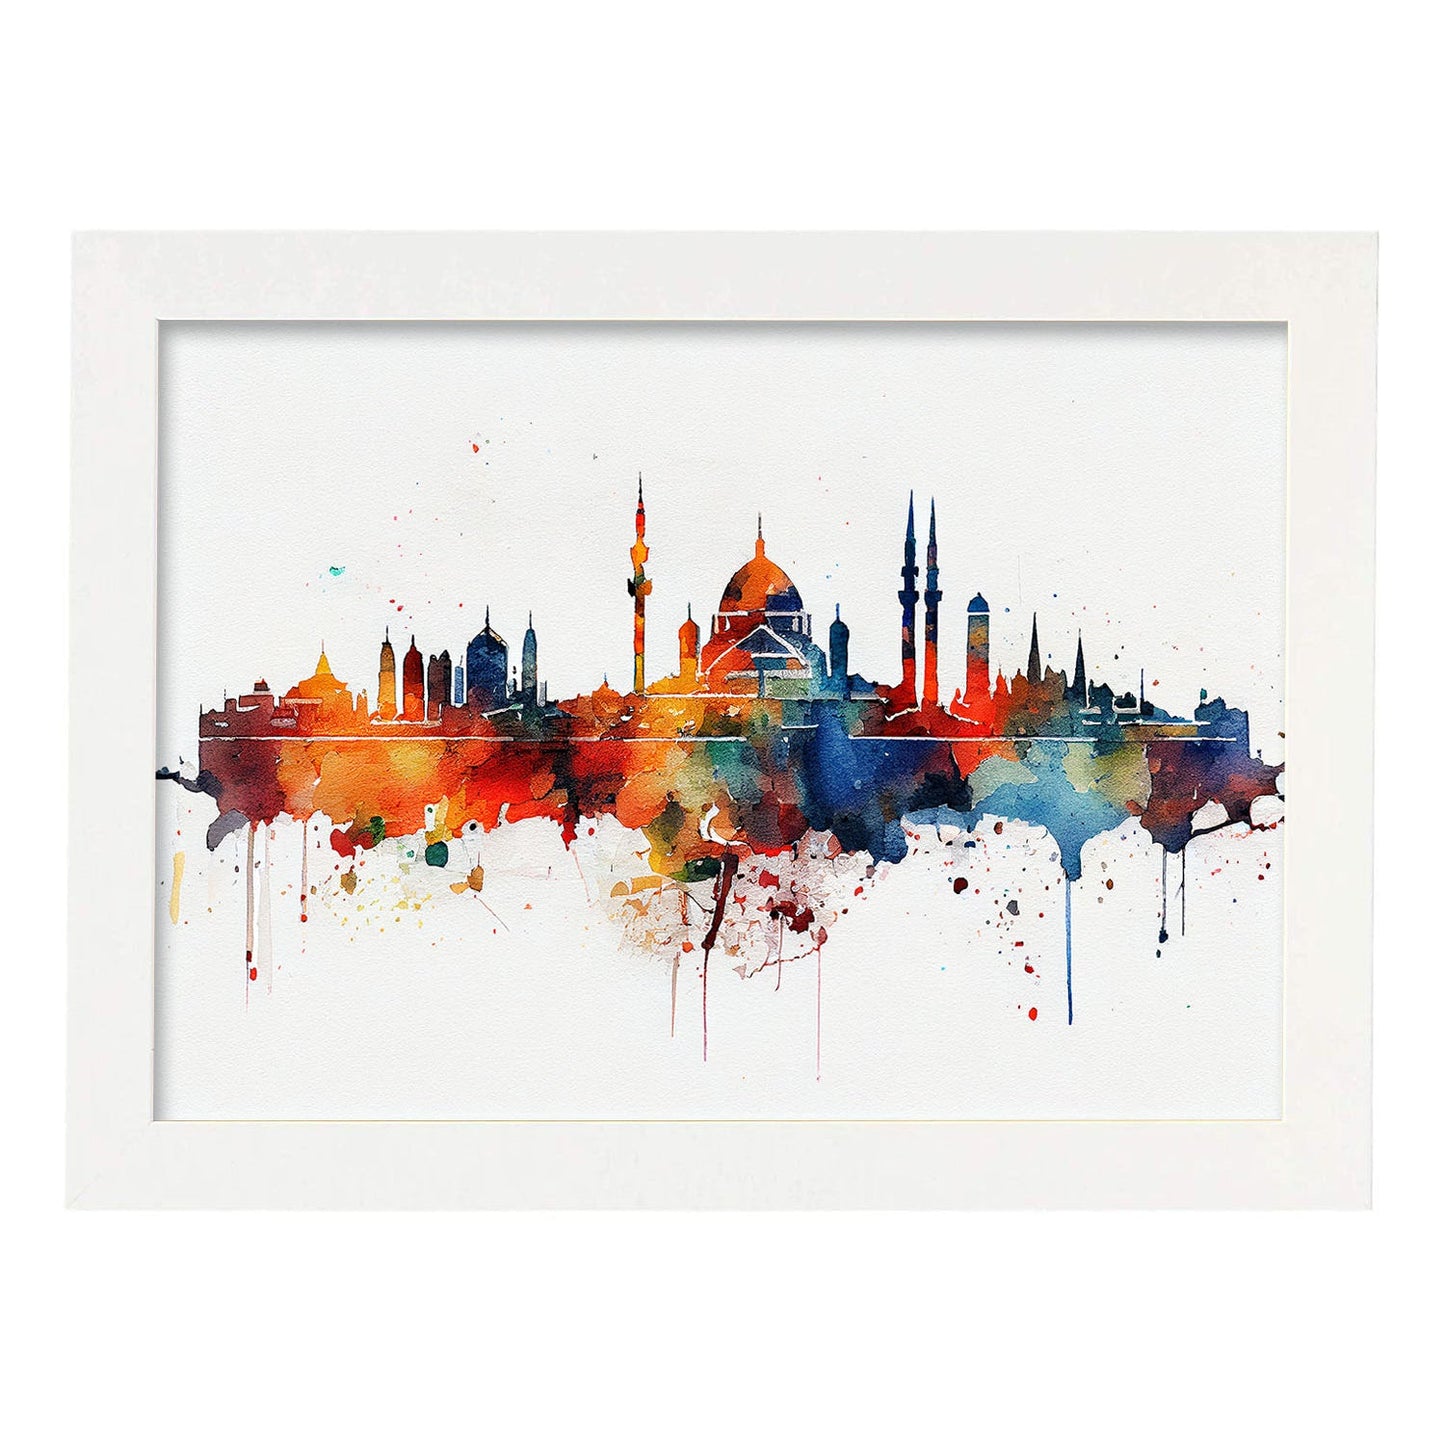 Nacnic watercolor of a skyline of the city of Istanbul_3. Aesthetic Wall Art Prints for Bedroom or Living Room Design.-Artwork-Nacnic-A4-Marco Blanco-Nacnic Estudio SL